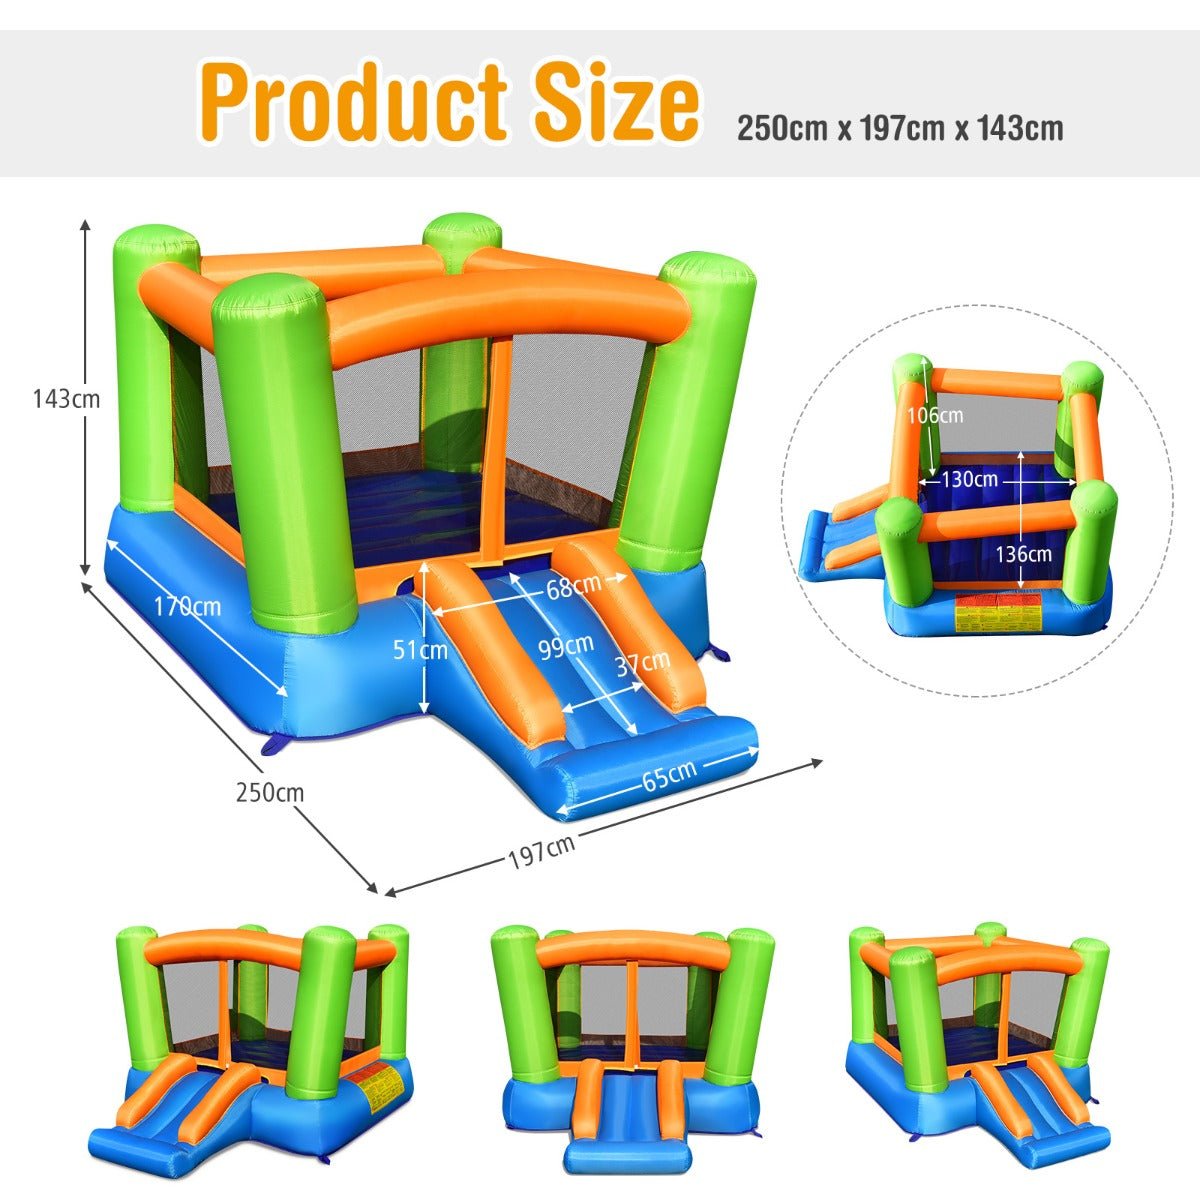 Inflatable Bounce House - Your Ticket to Endless Entertainment